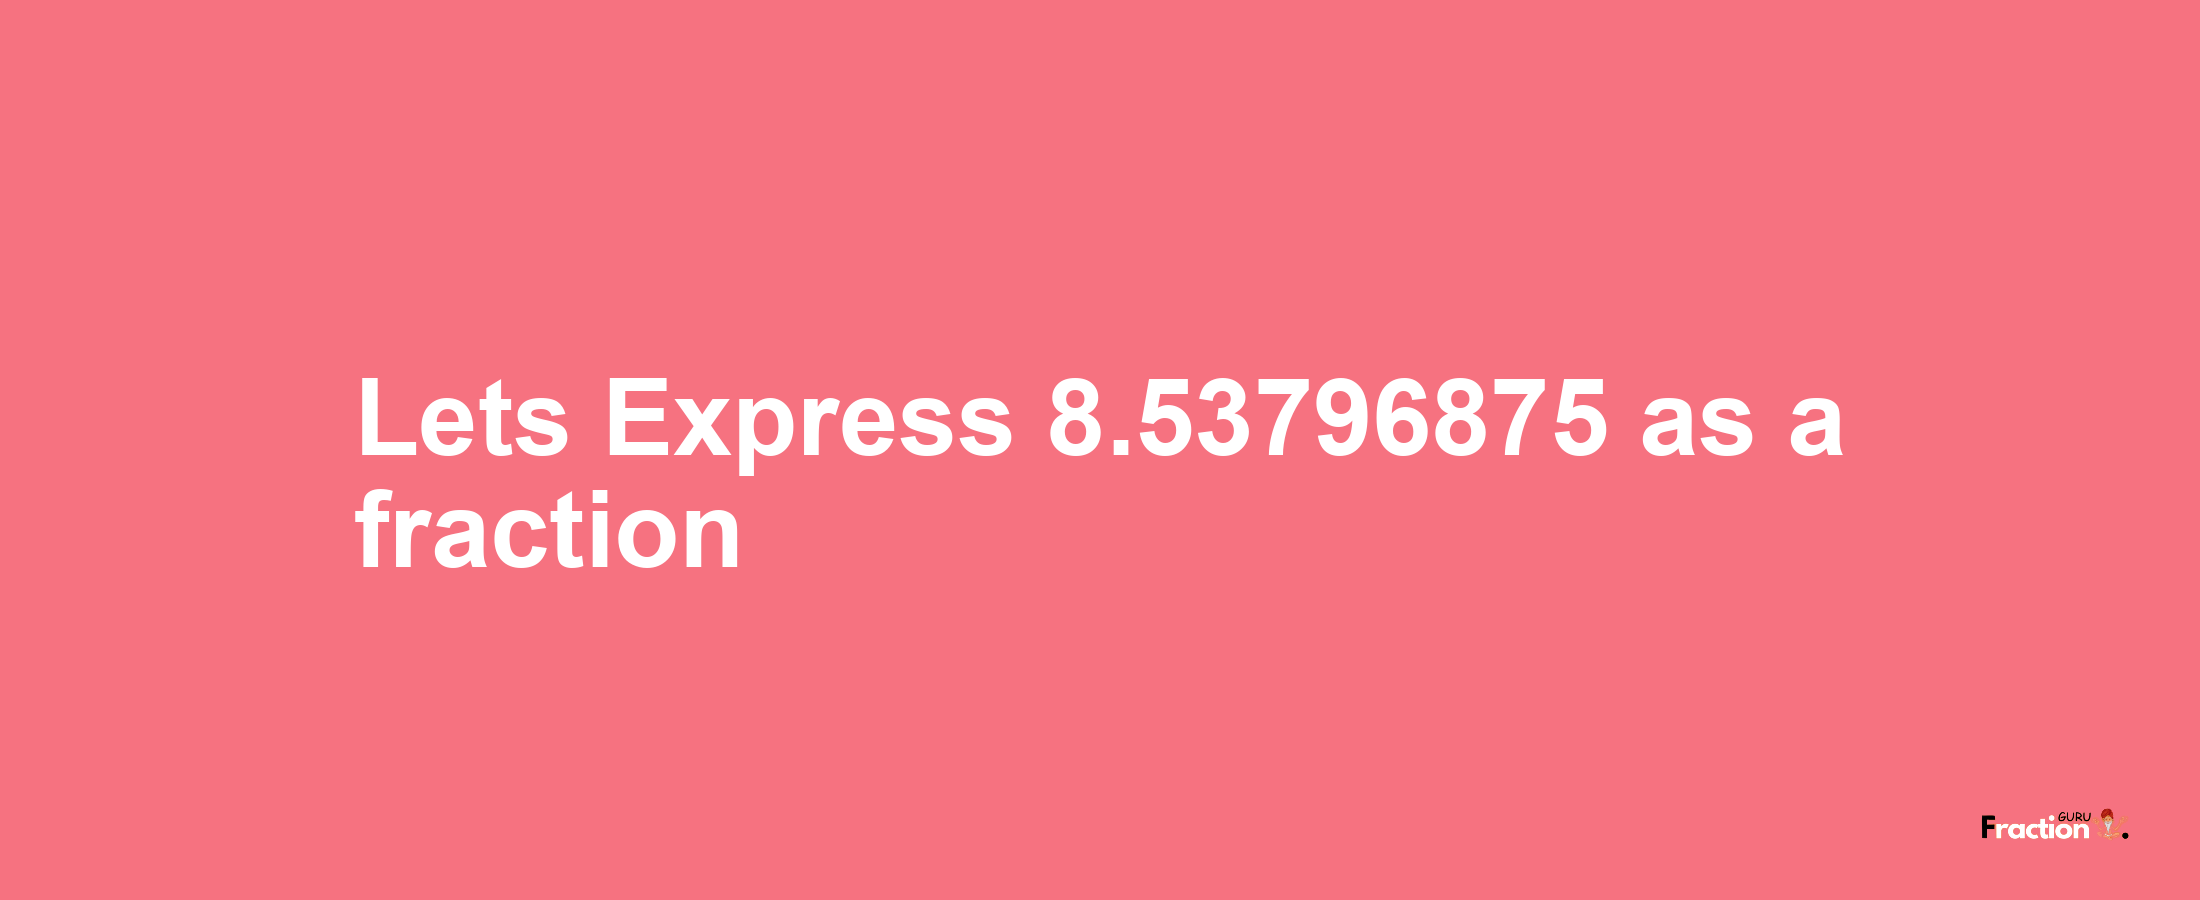 Lets Express 8.53796875 as afraction